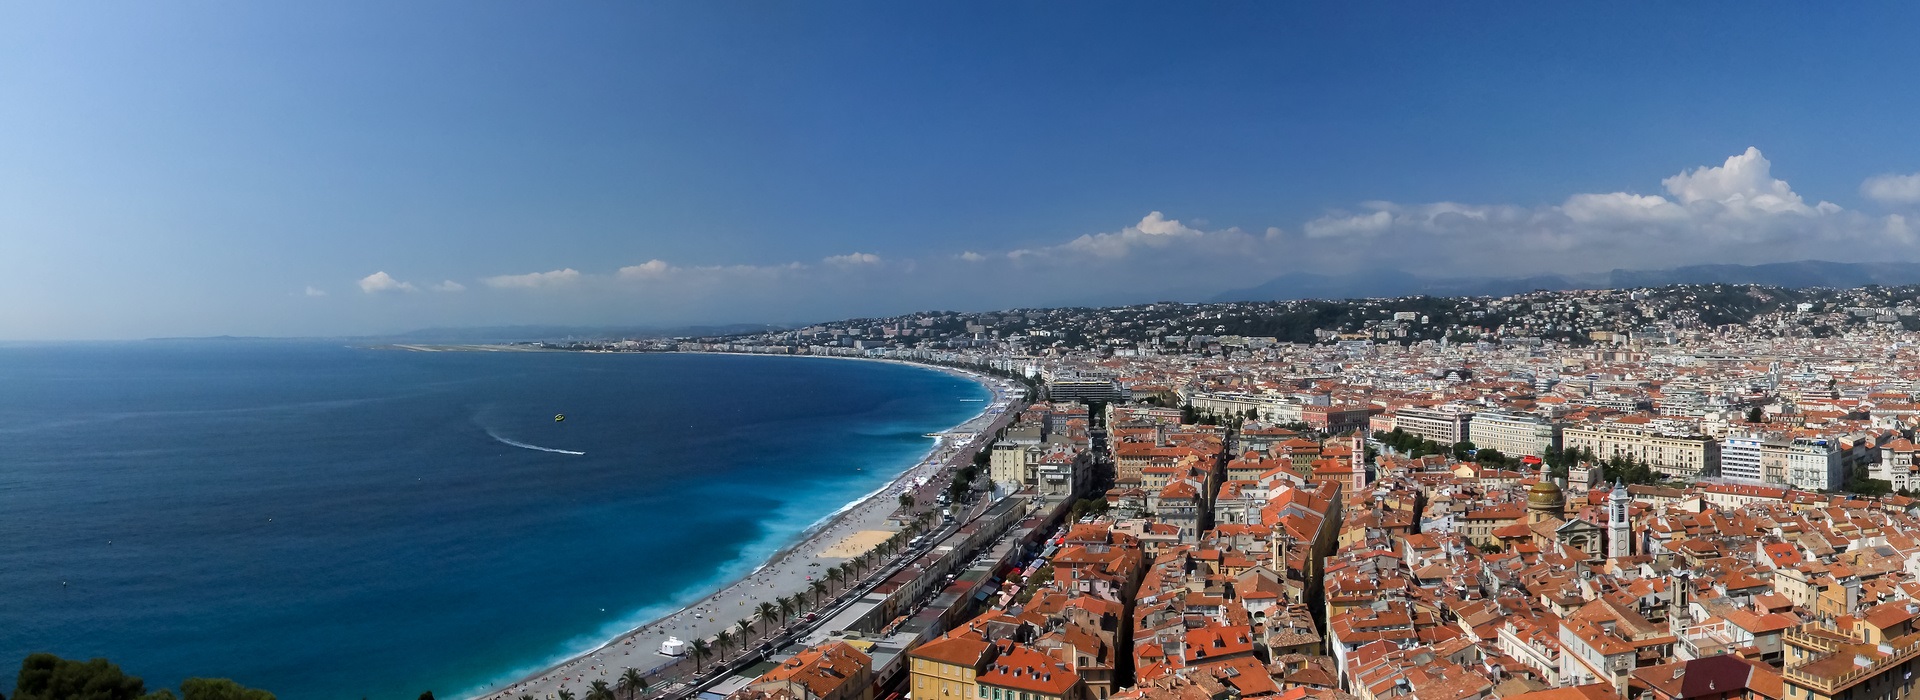 BPS Business Property Services French Riviera Nice